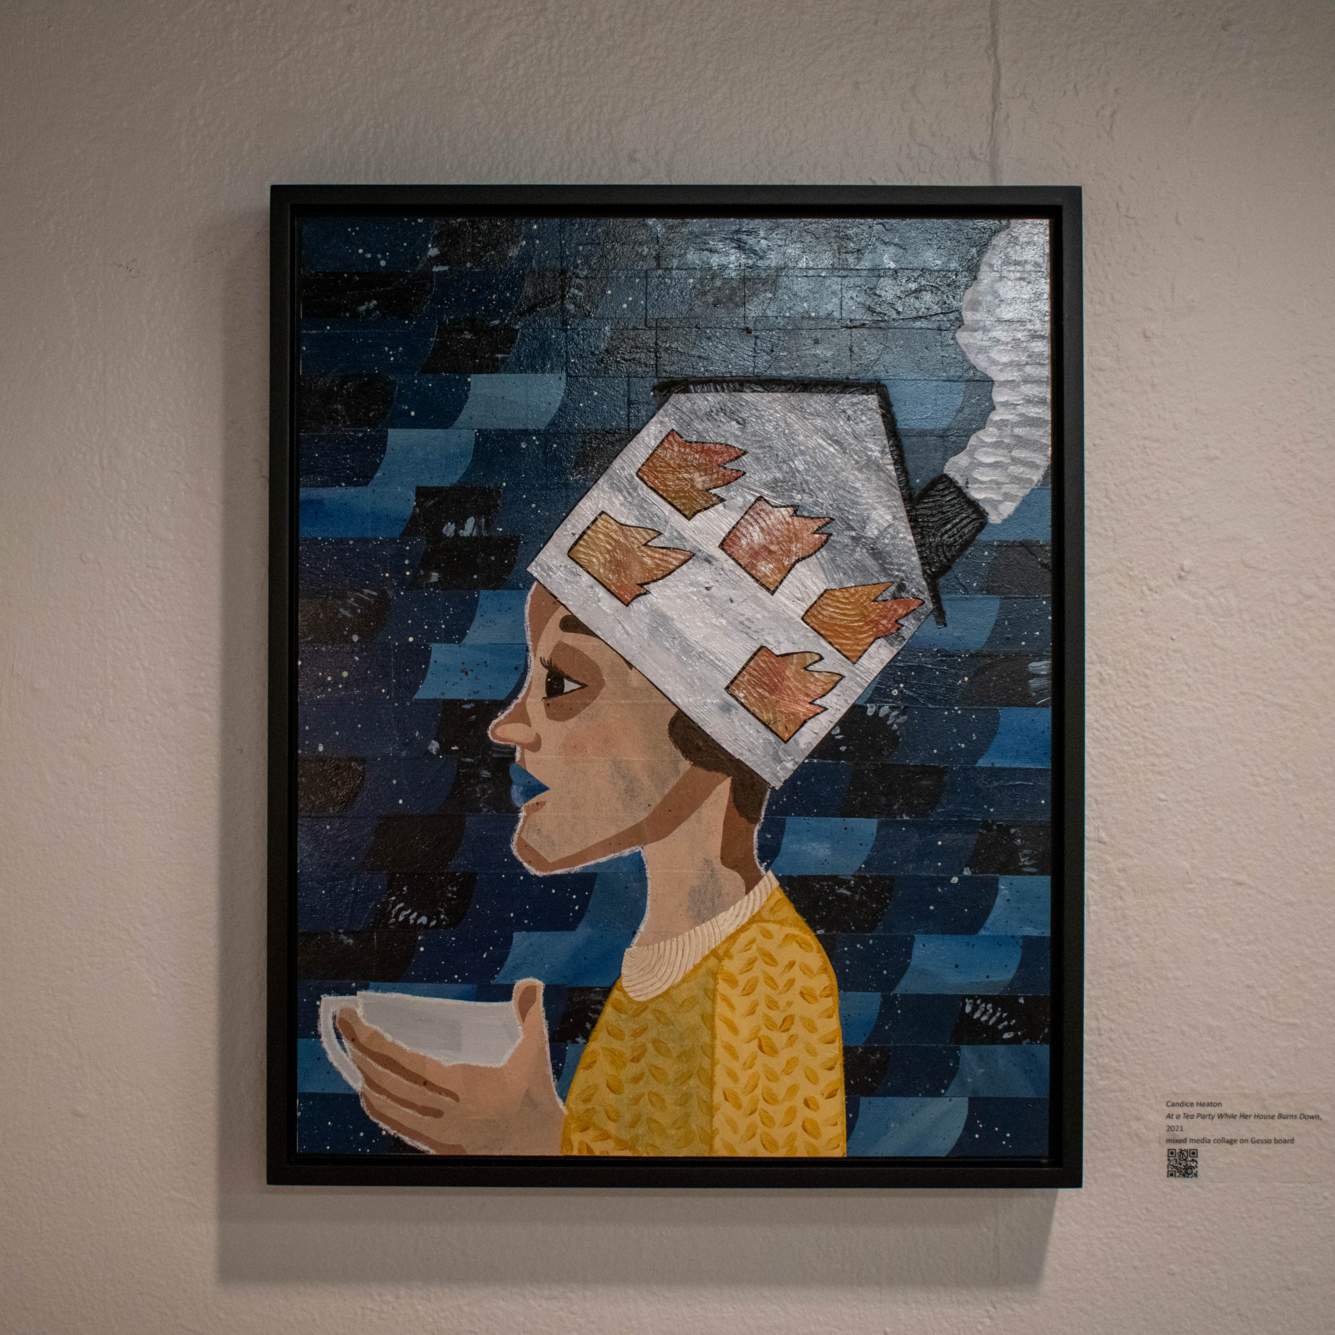 Gesso and mixed media textured painting of a woman with a burning house as a hat while holding a tea cup on a multi-blue background. Hung on a white wall.